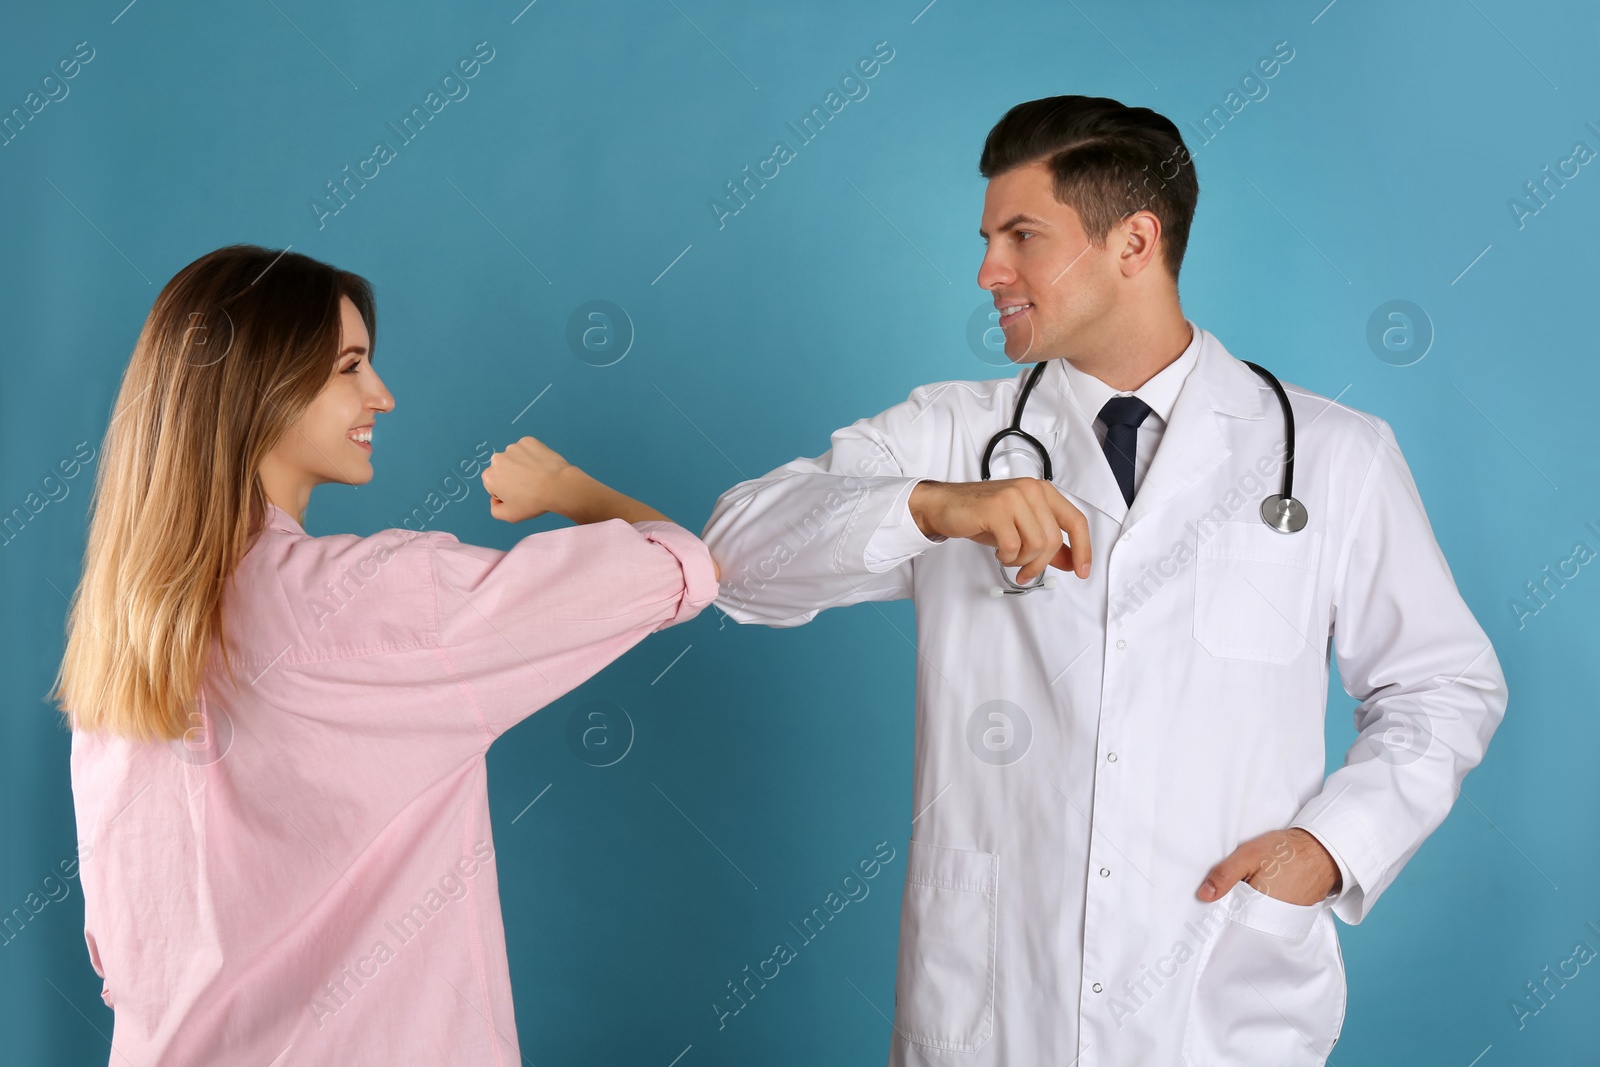 Photo of Doctor and patient doing elbow bump instead of handshake on light blue background. New greeting during COVID-19 pandemic